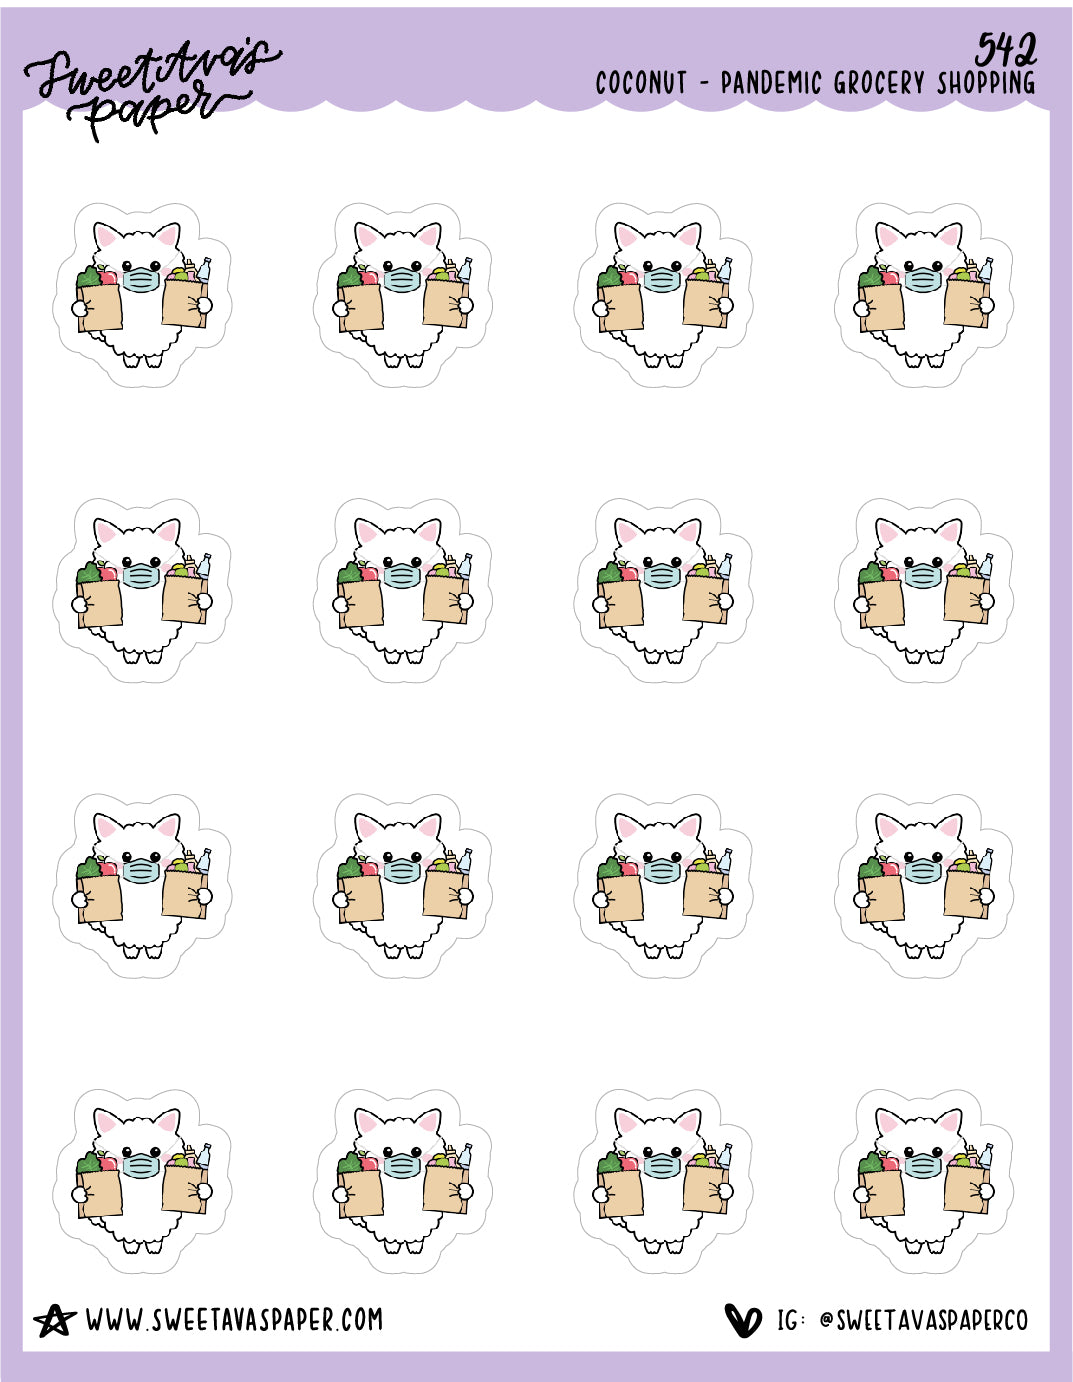 Grocery Shopping Planner Stickers - Coconut the Puppy [542]